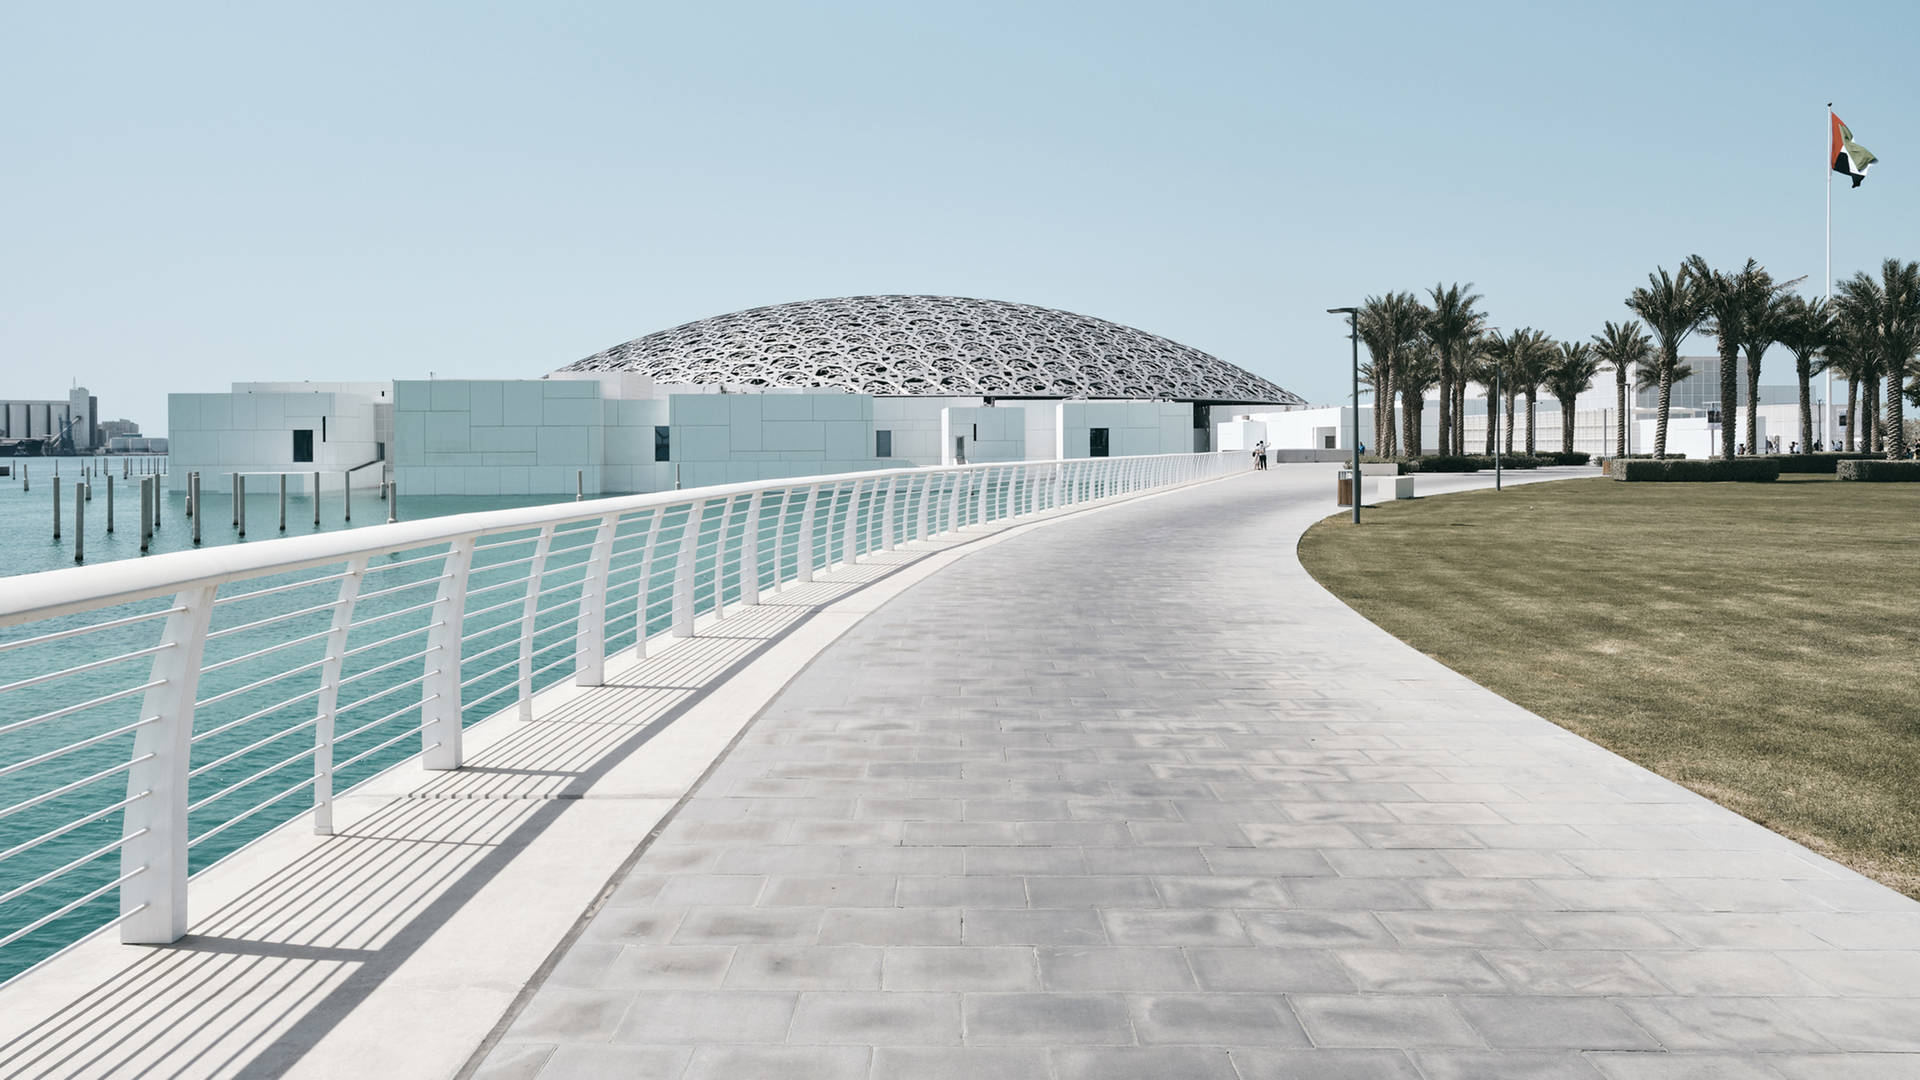 The exterior of the Louvre Abu Dhabi